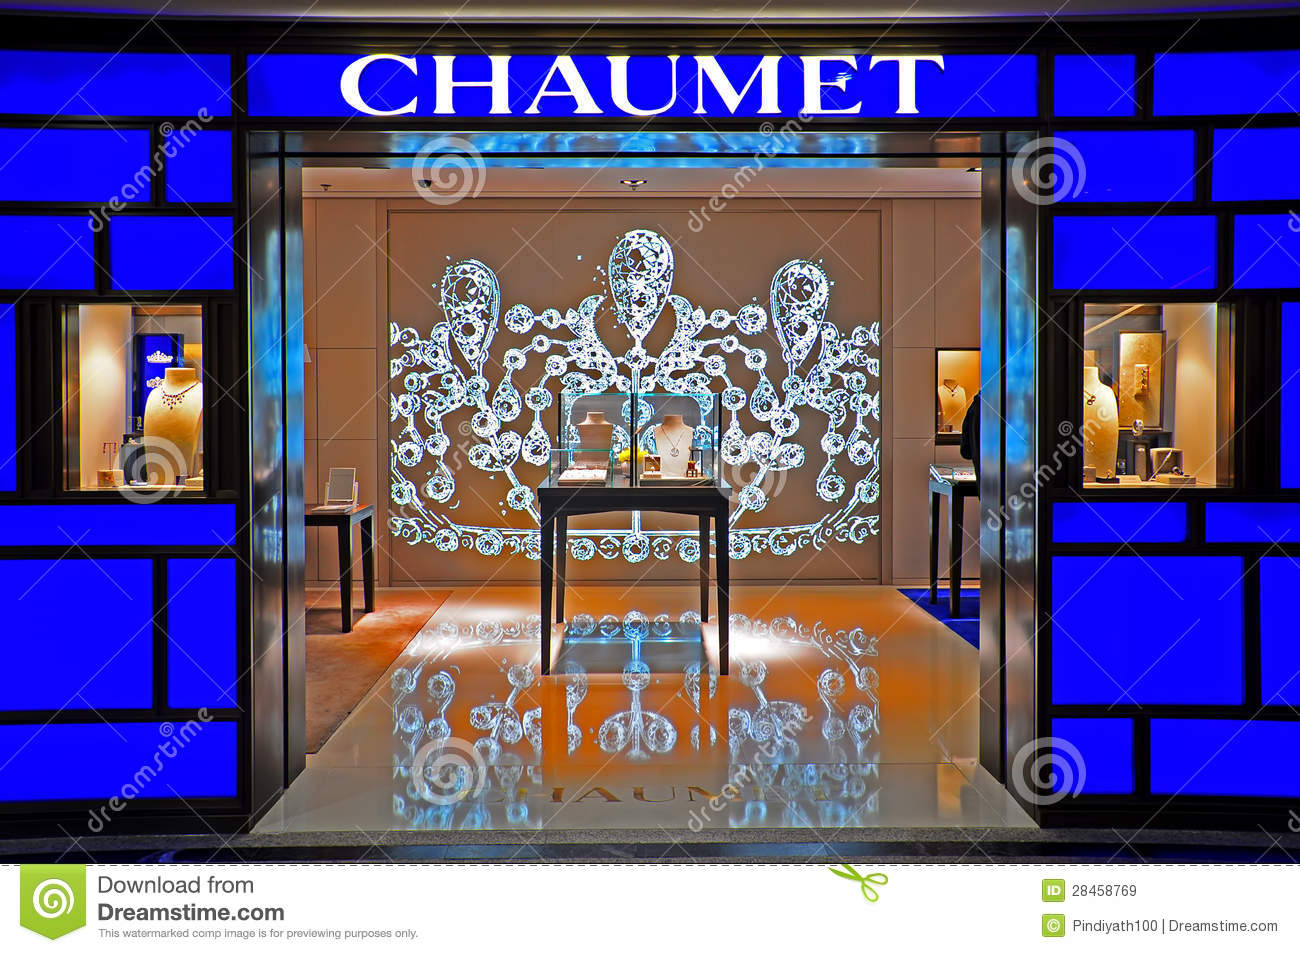 Boutique Of Chaumet Jewelry Boutique At The Time Square Shopping Mall